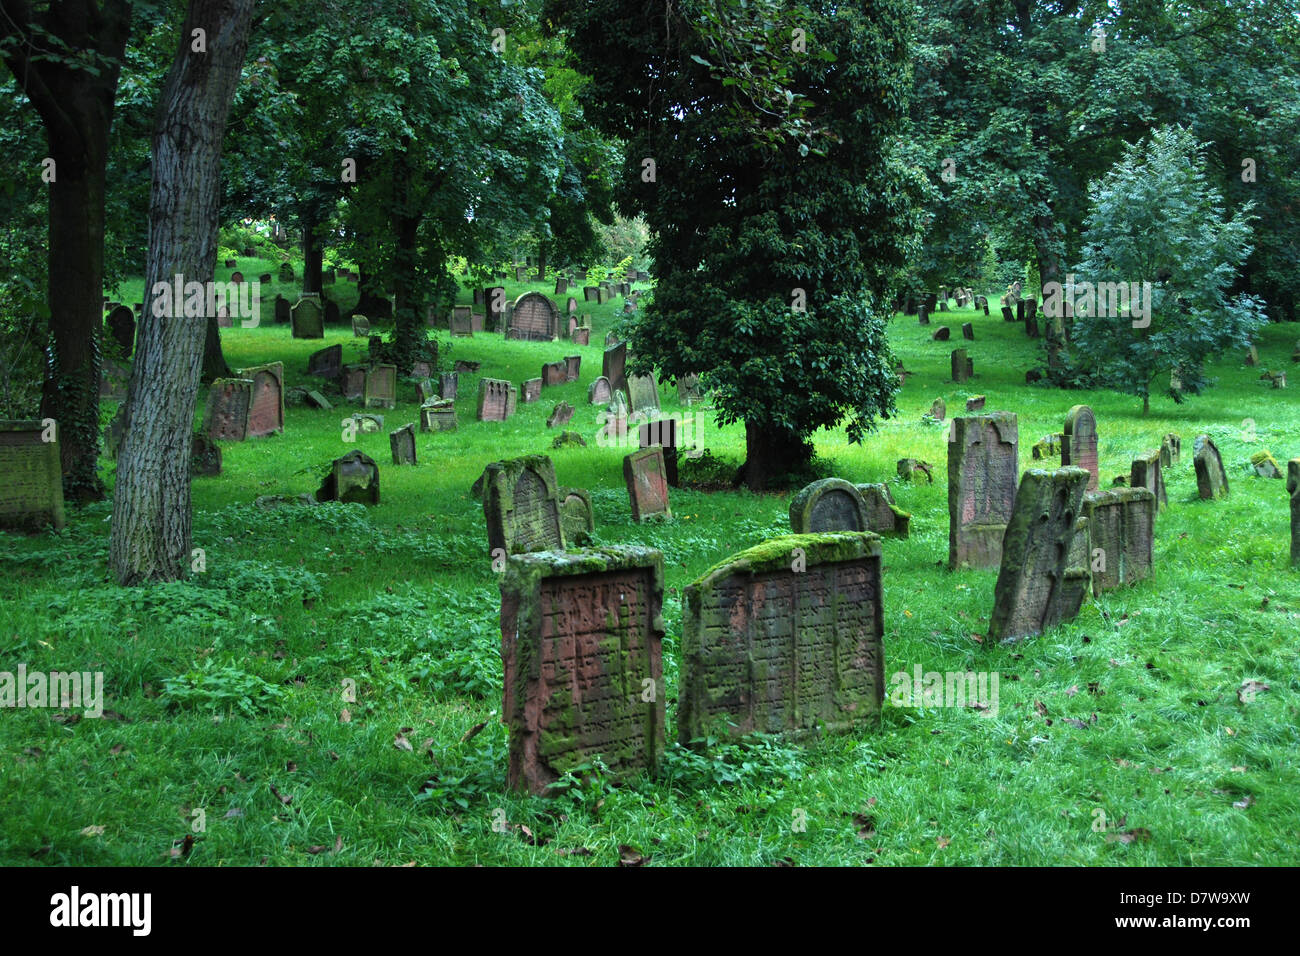 An old, abandoned Jewish cemetery in Germany Stock Photo